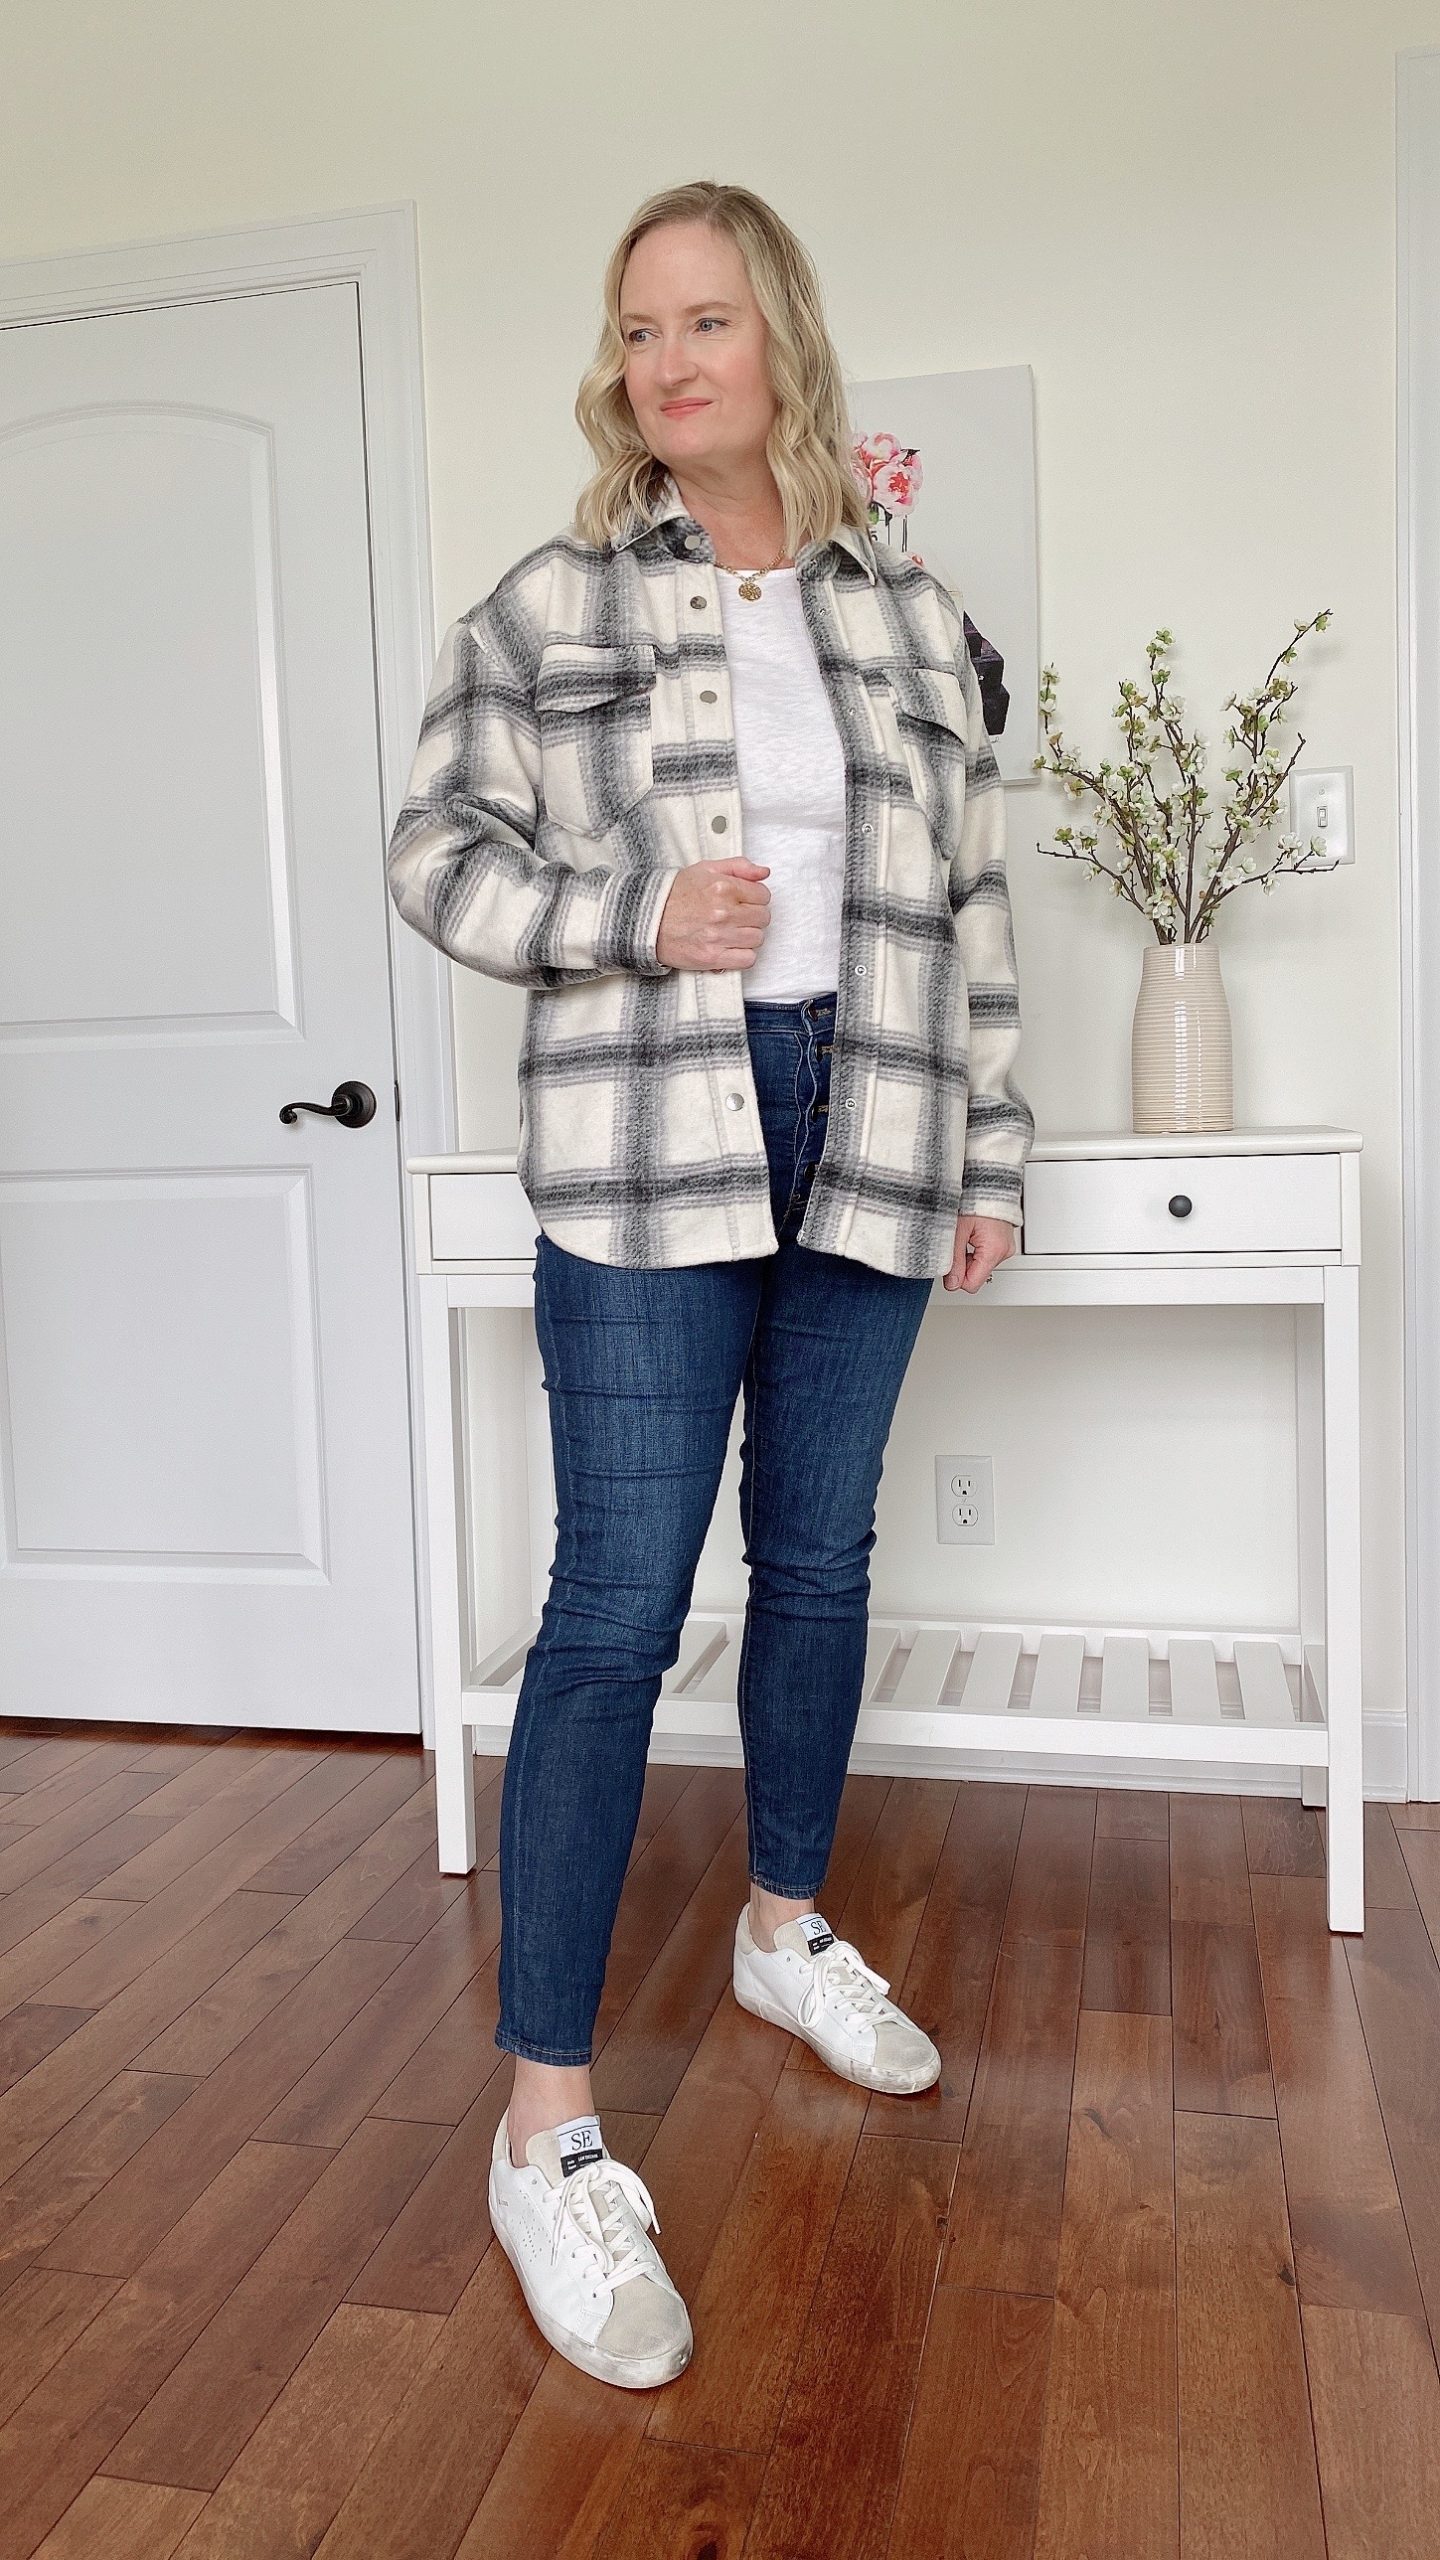 how to style a pair of plaid pants : brown jacket + white top + sneakers   Spring outfits casual, Trendy outfits inspiration, Trendy spring outfits